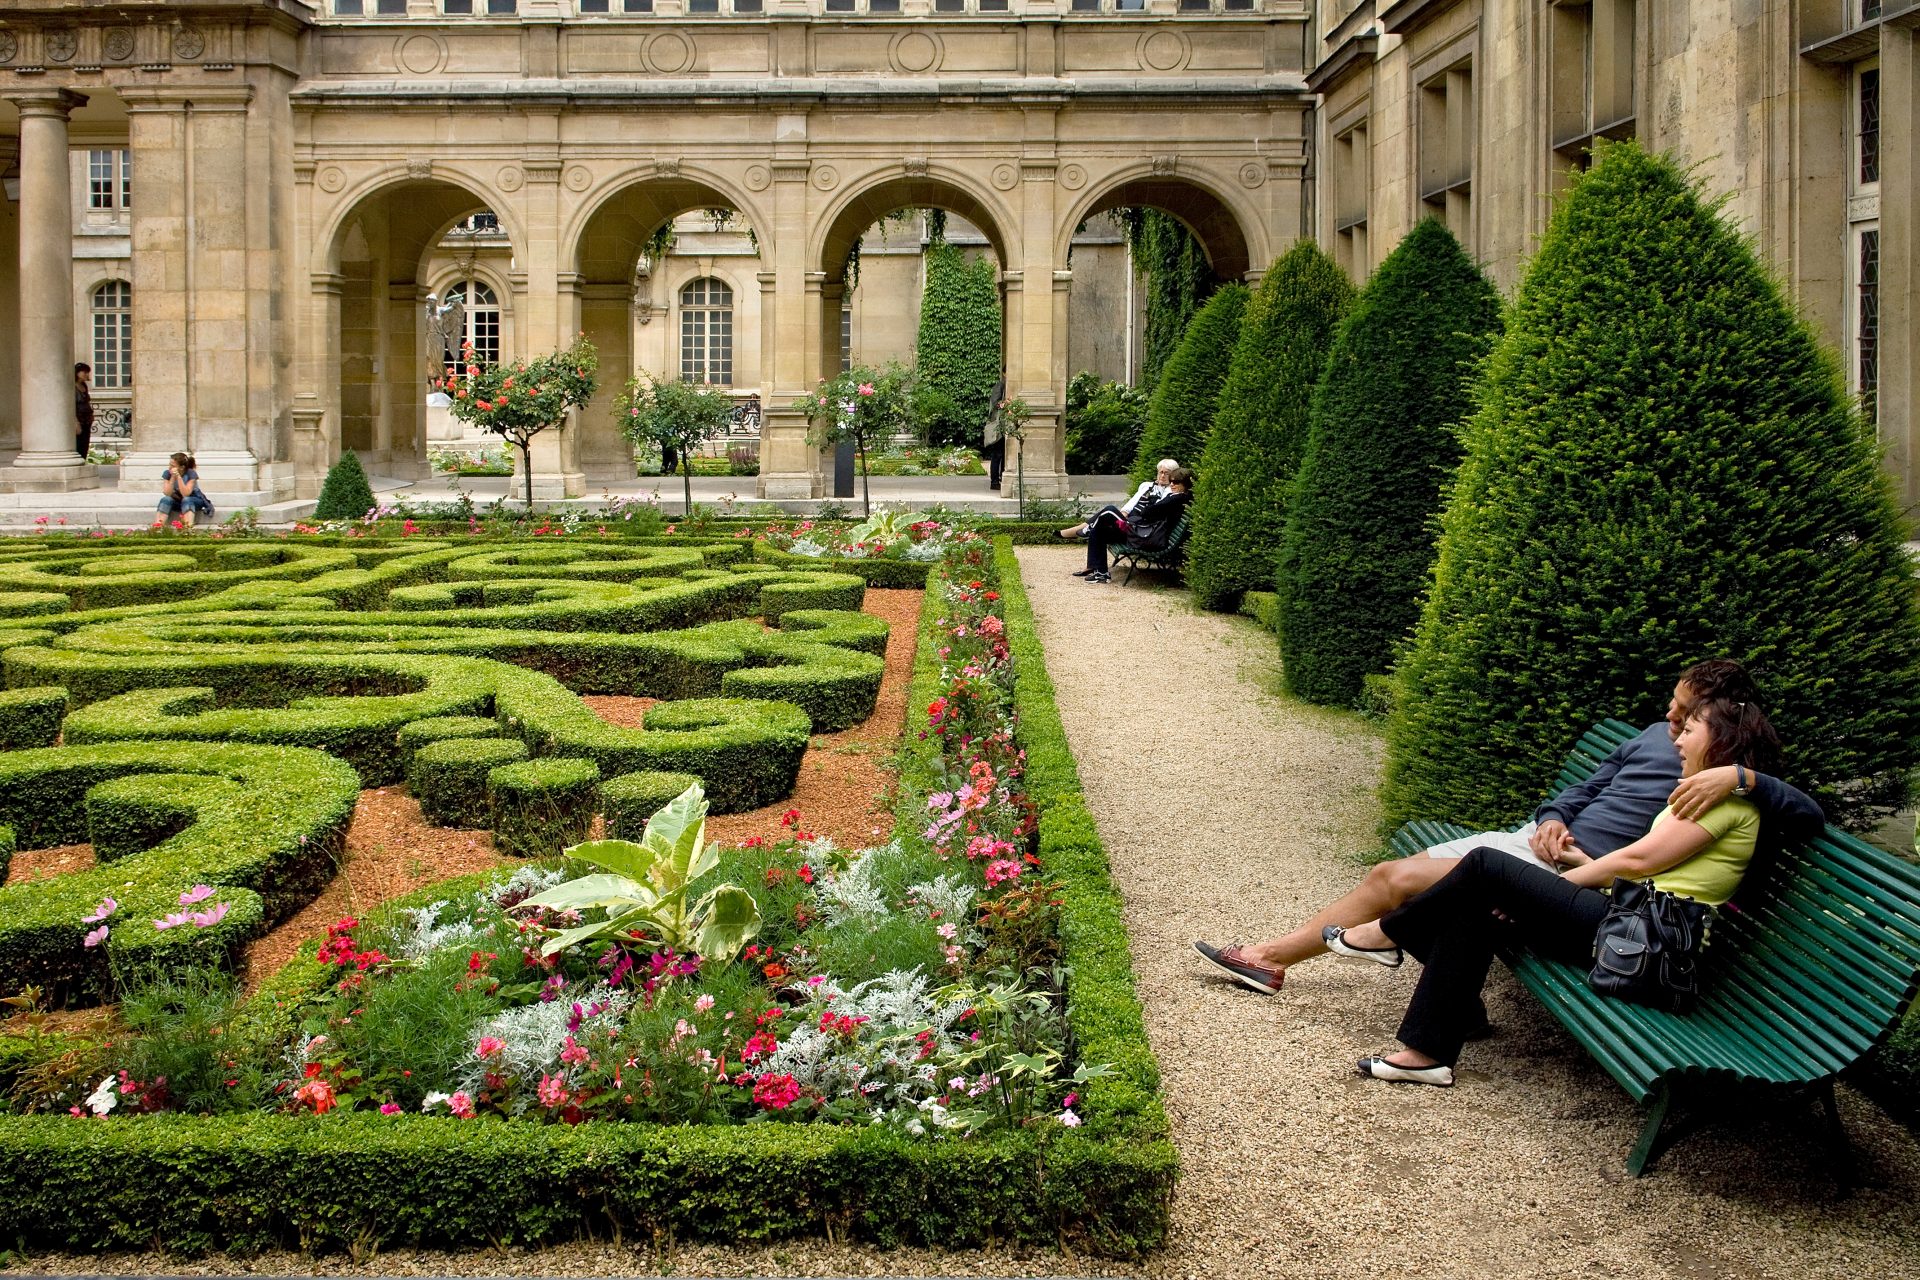 <p>In the Marais district, the Carnavalet Museum is dedicated to the history of Paris. Sprinkled with artistic sculptures, shrubs, and flowers, its garden is a pleasant spot, ideal for taking a break on one of its benches during the day.</p>